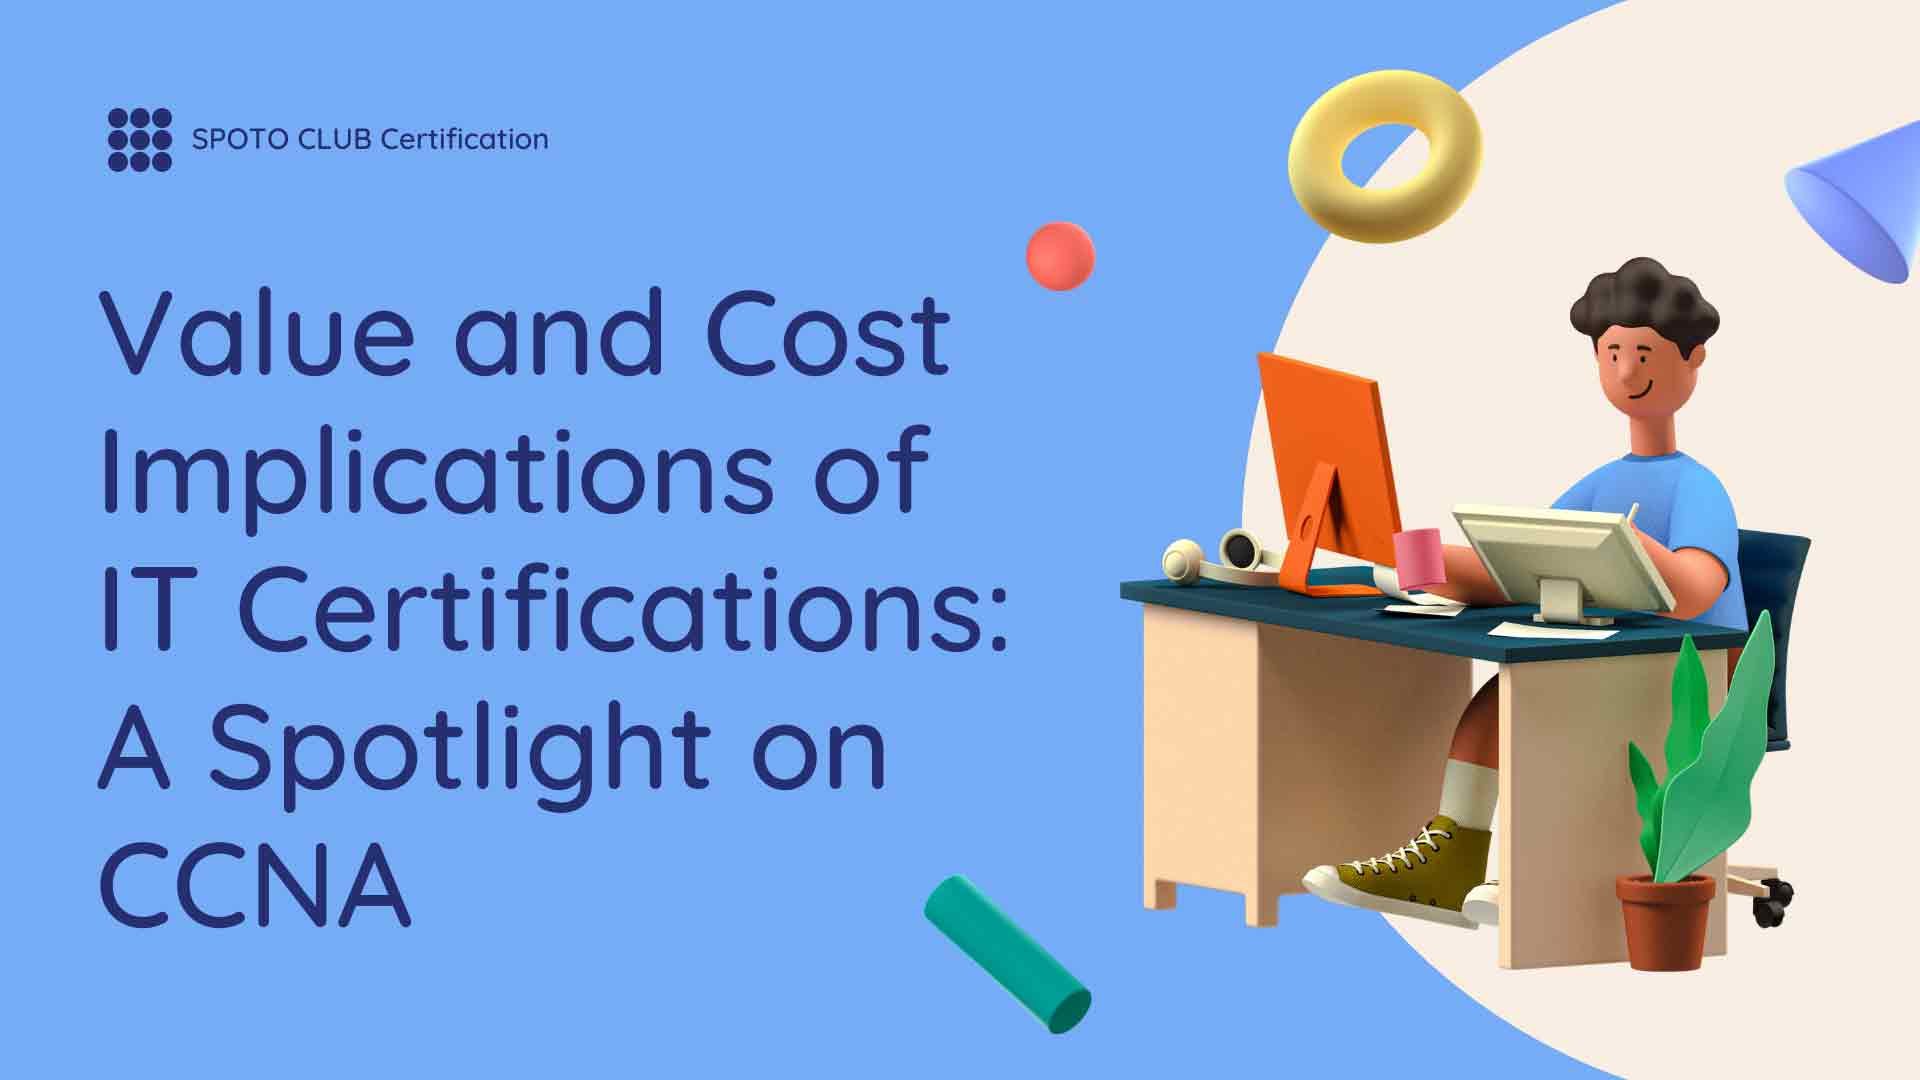 Value and Cost Implications of IT Certifications: A Spotlight on CCNA